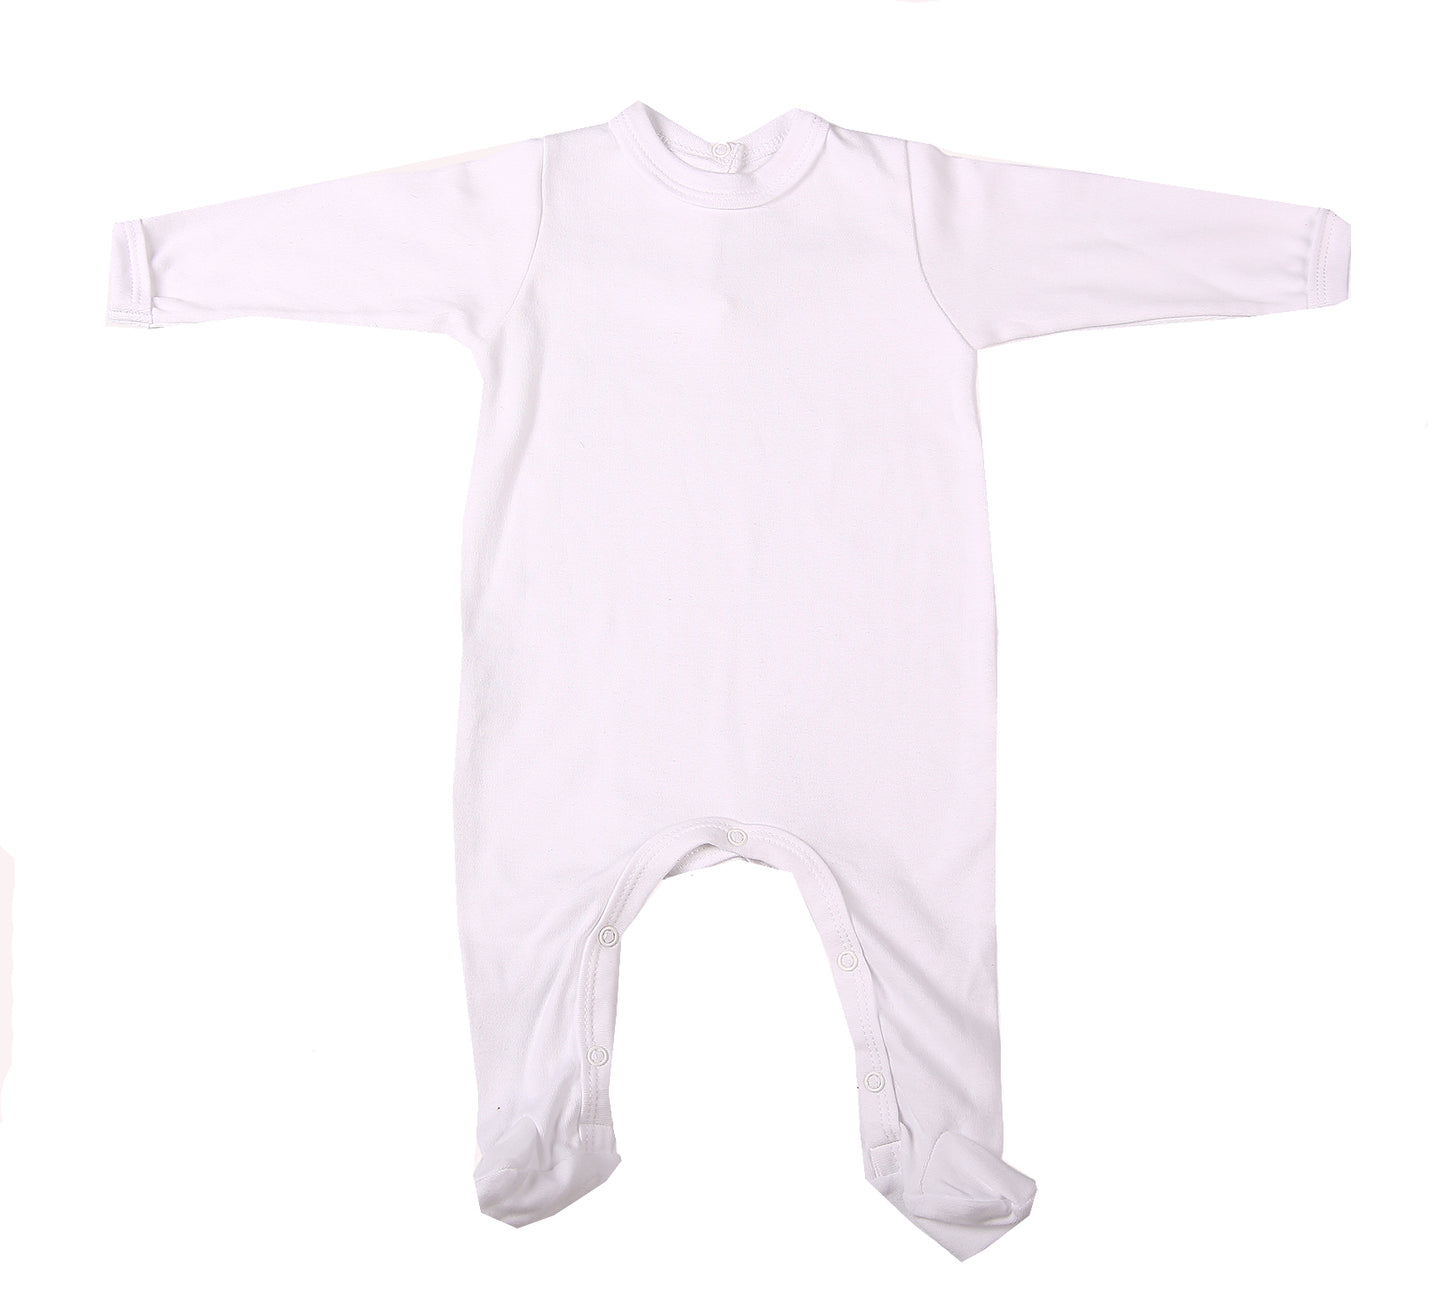 2-Pack Back-Fastening Blank Babygros Made From 100% Cotton - Little Lumps